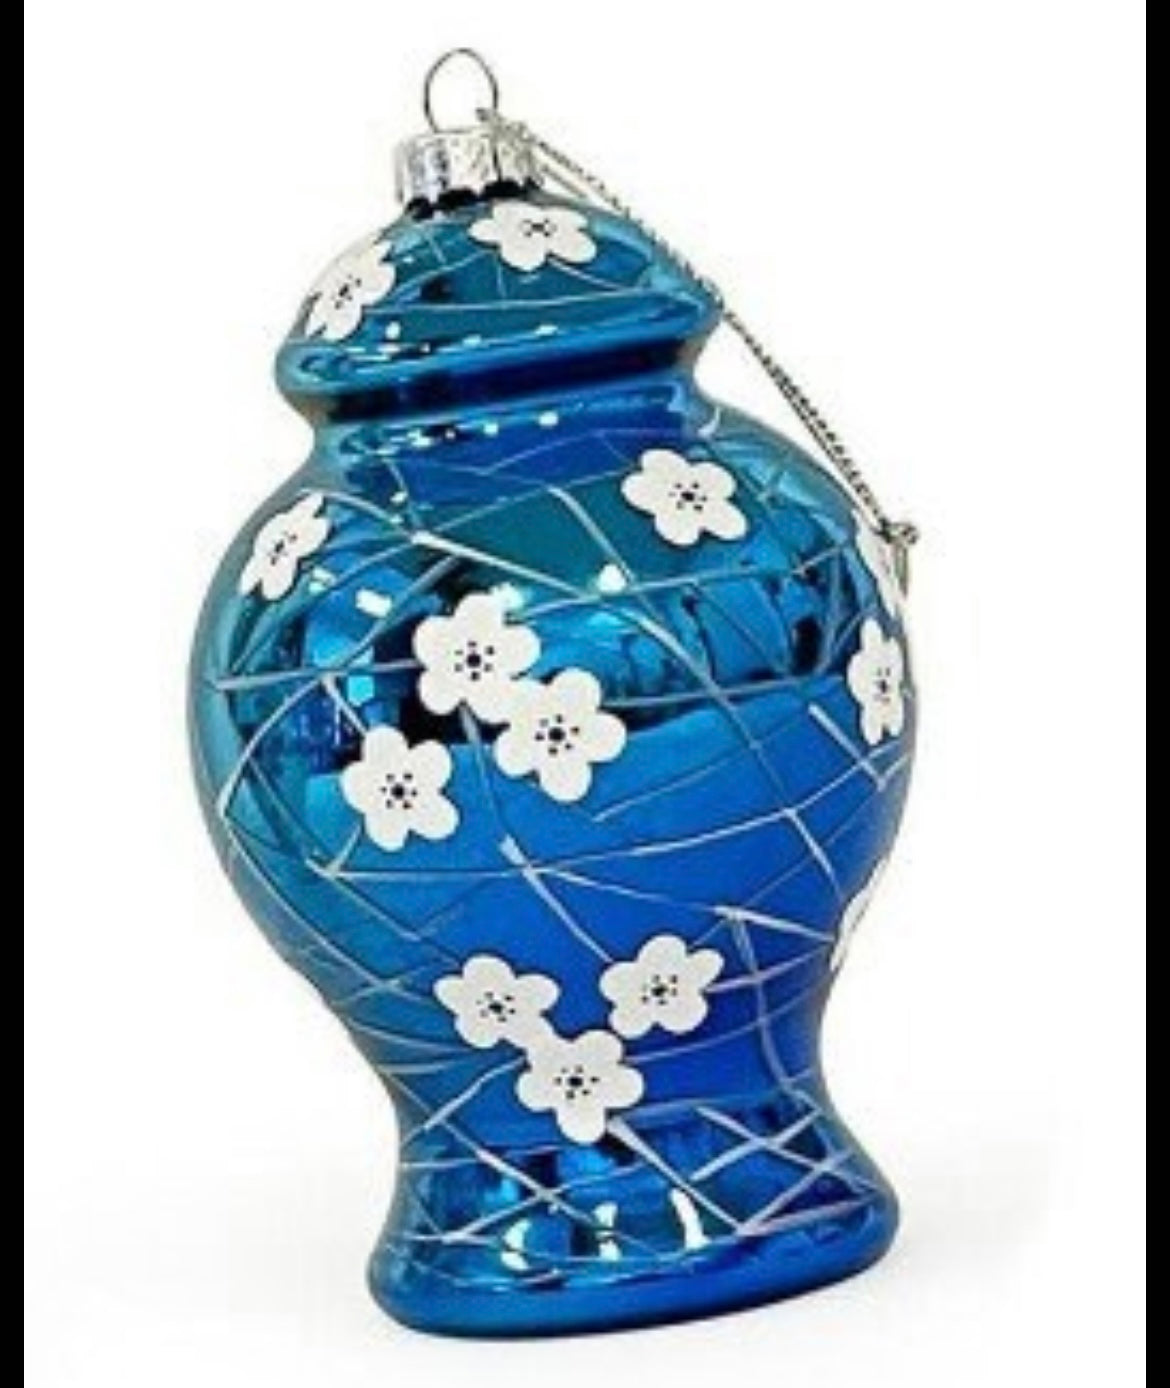 Blue and White Hand-Crafted Ornaments